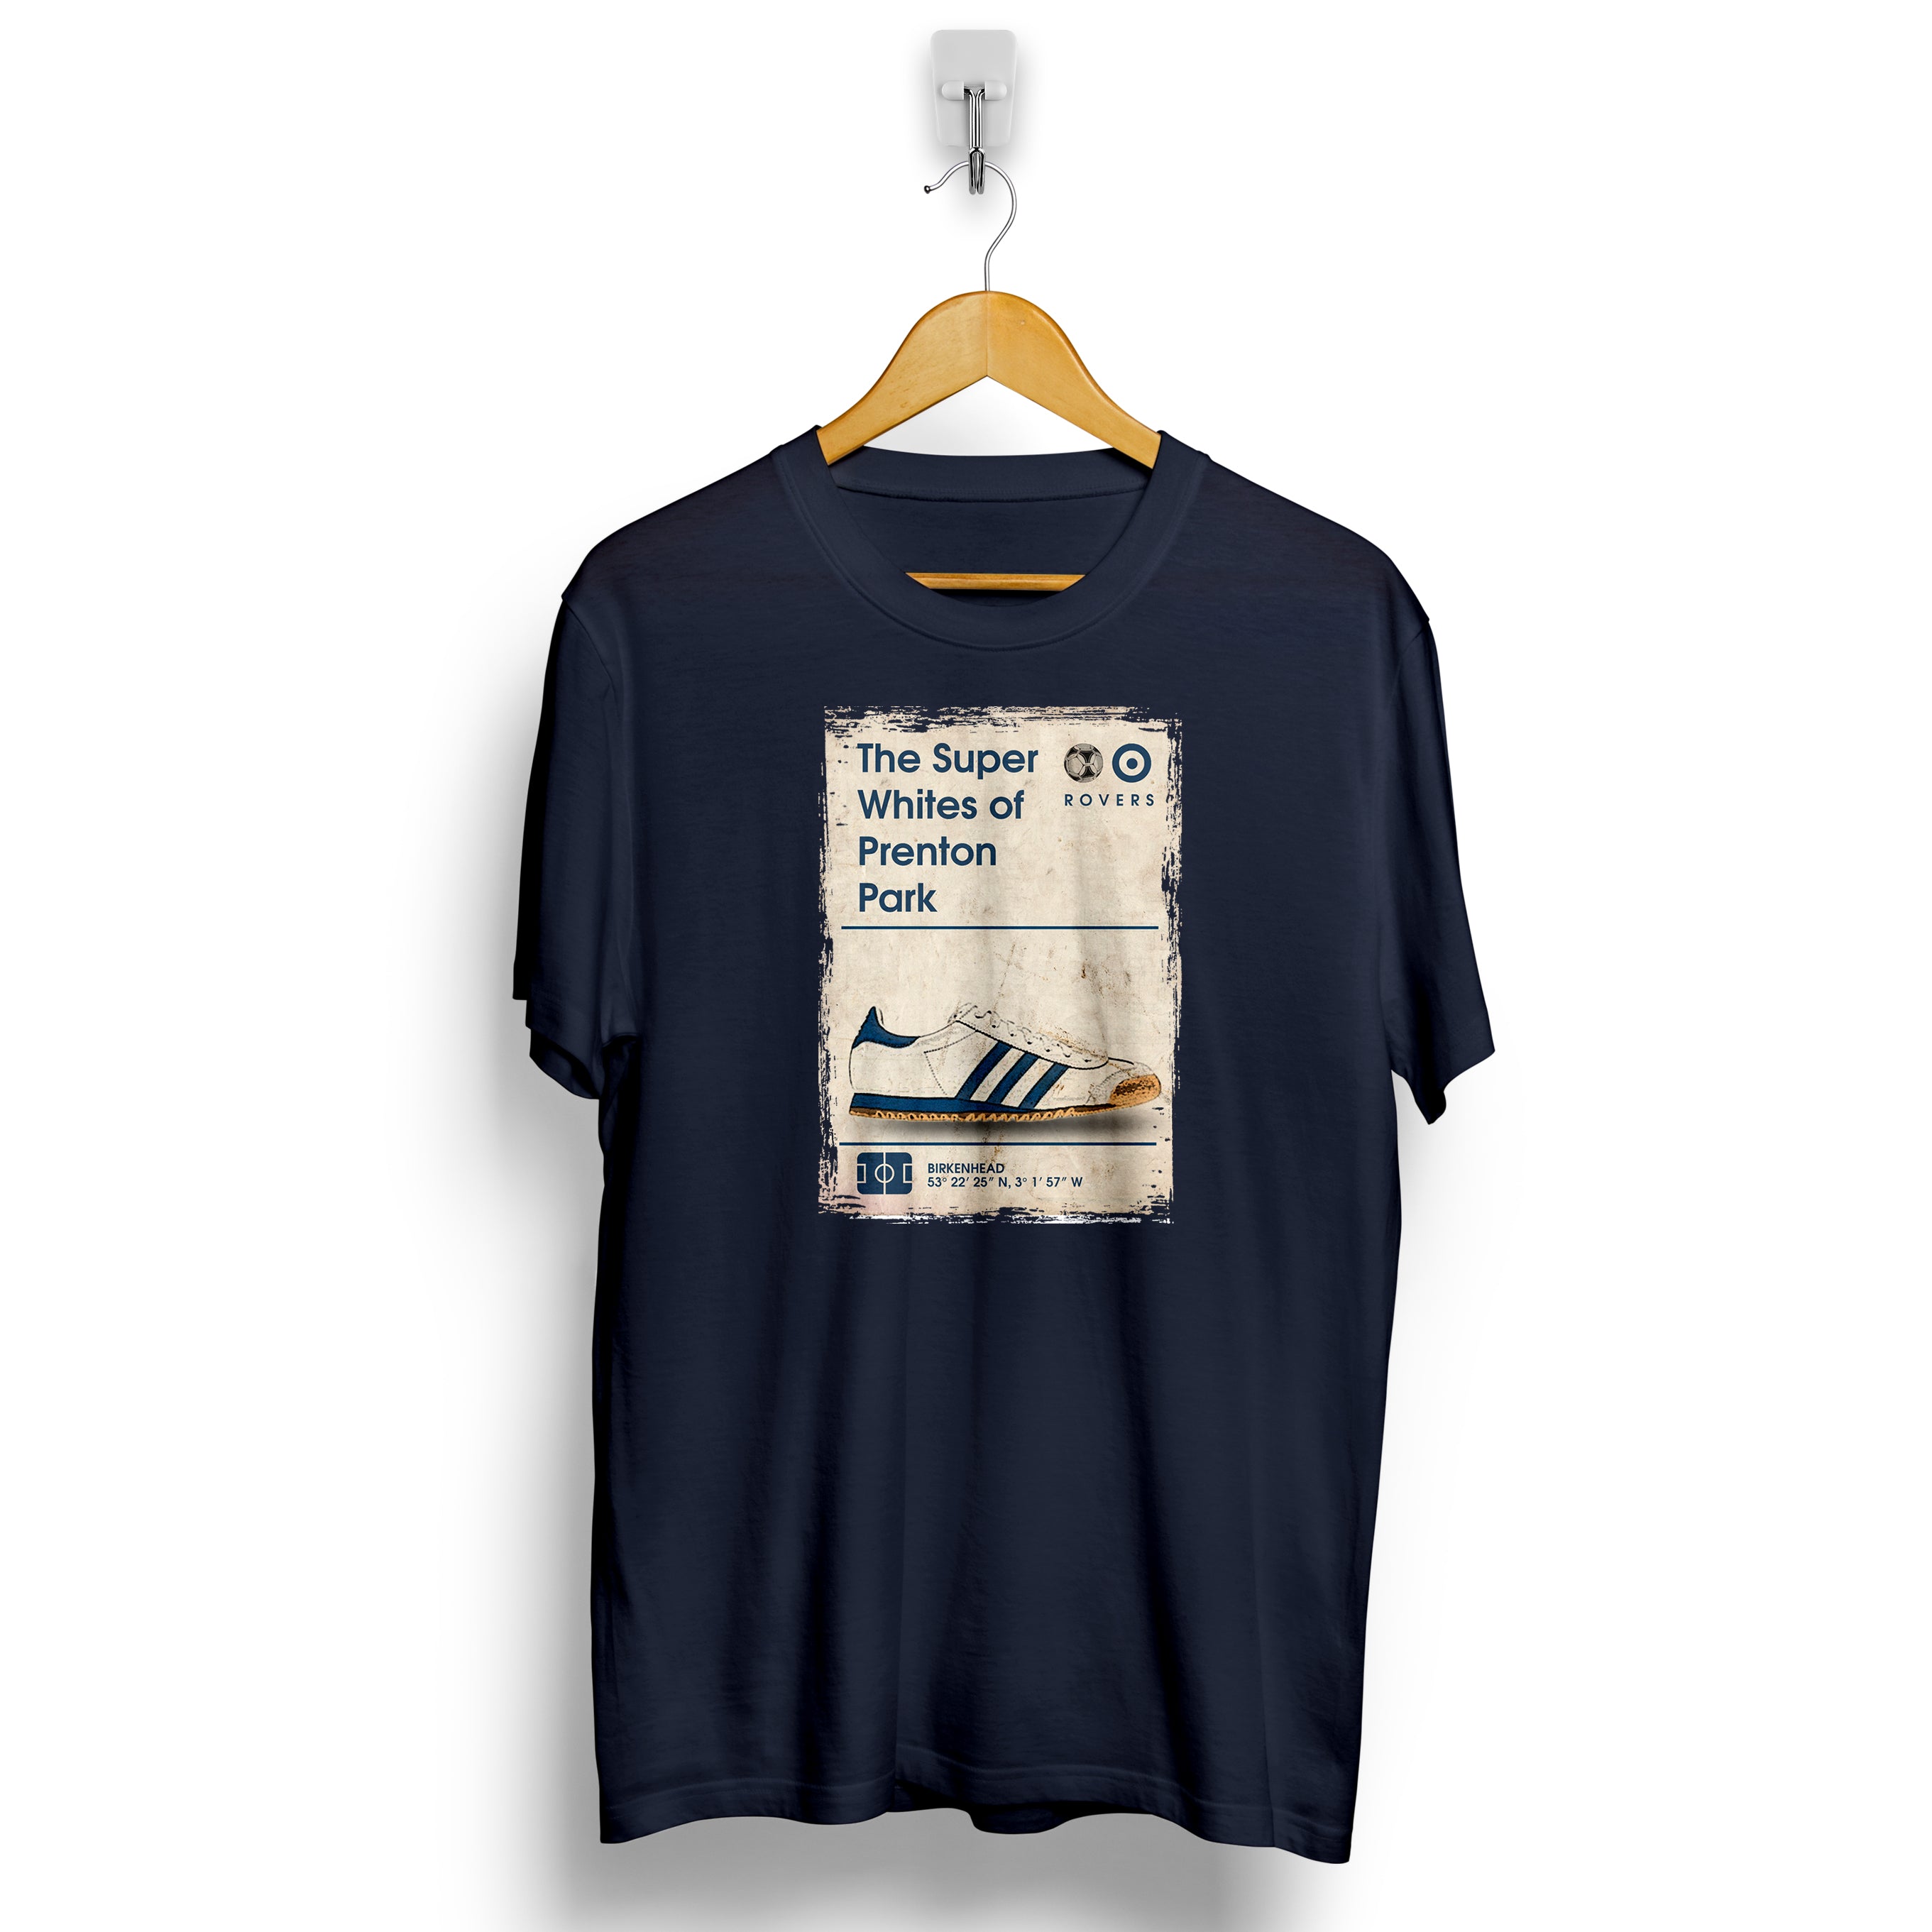 Tranmere Football Casuals T Shirt